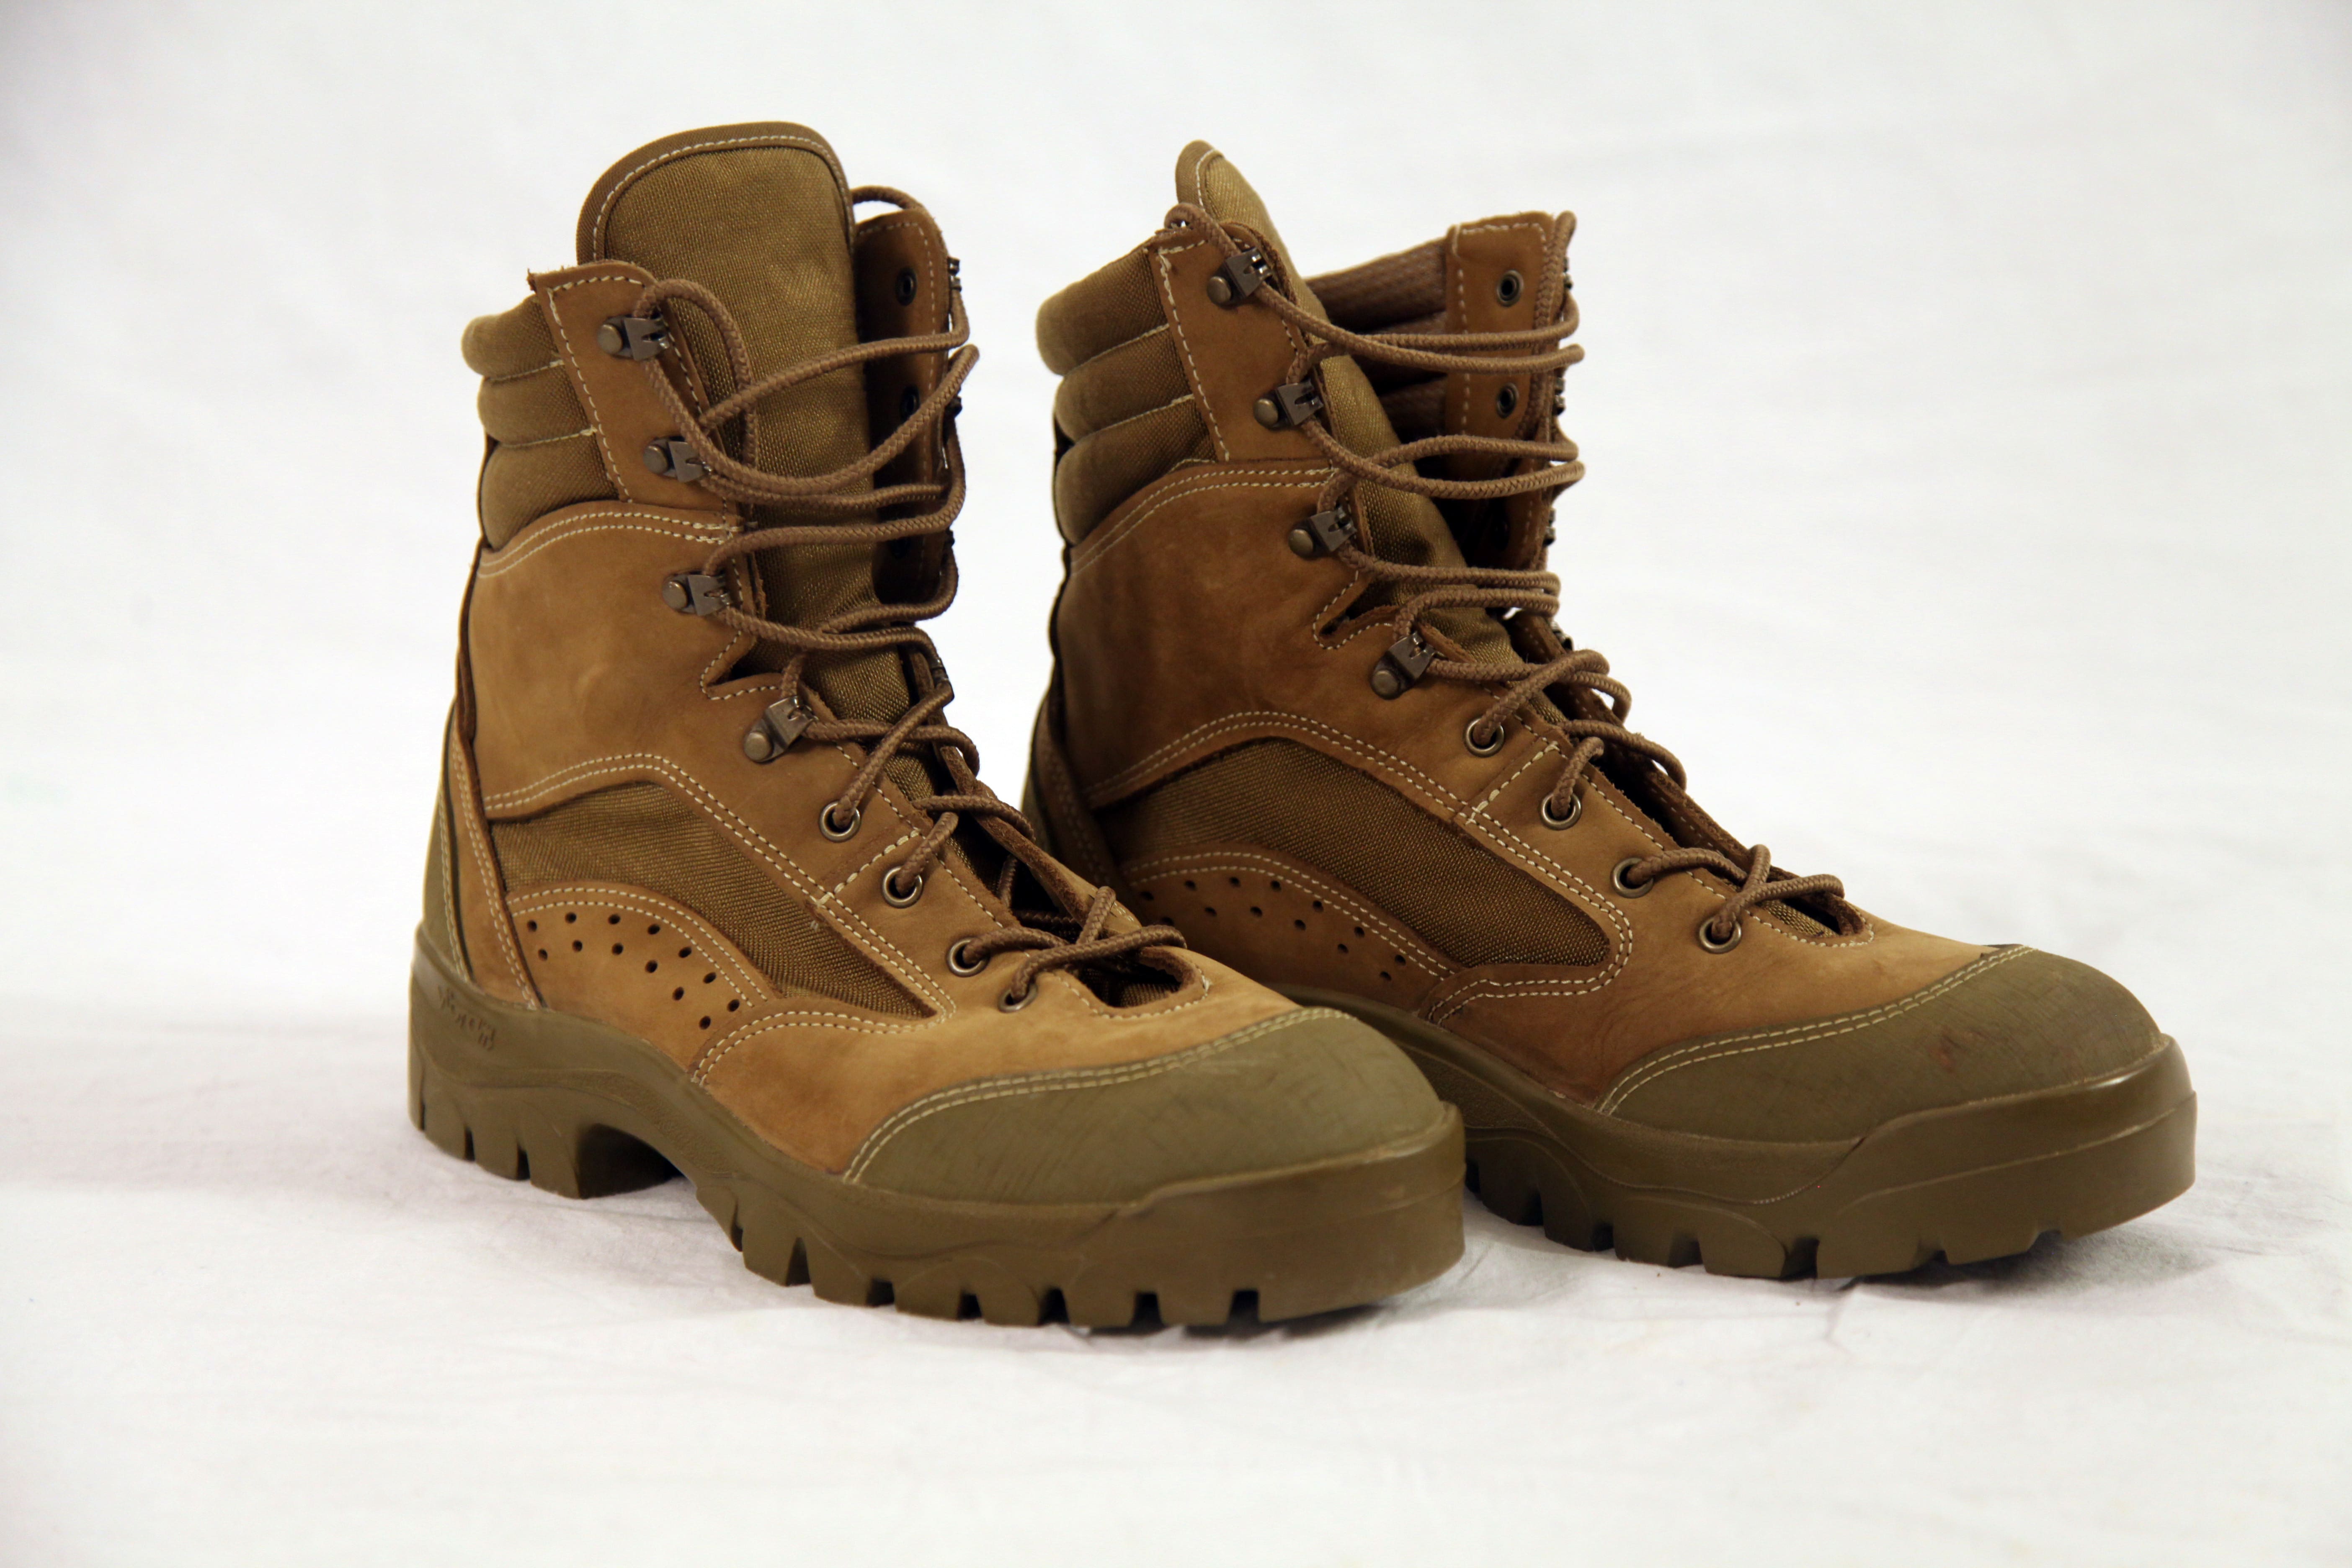 Navy NWU Coyote Brown Army OCP 6104 Rocky S2V Steel Toe Military Boots 